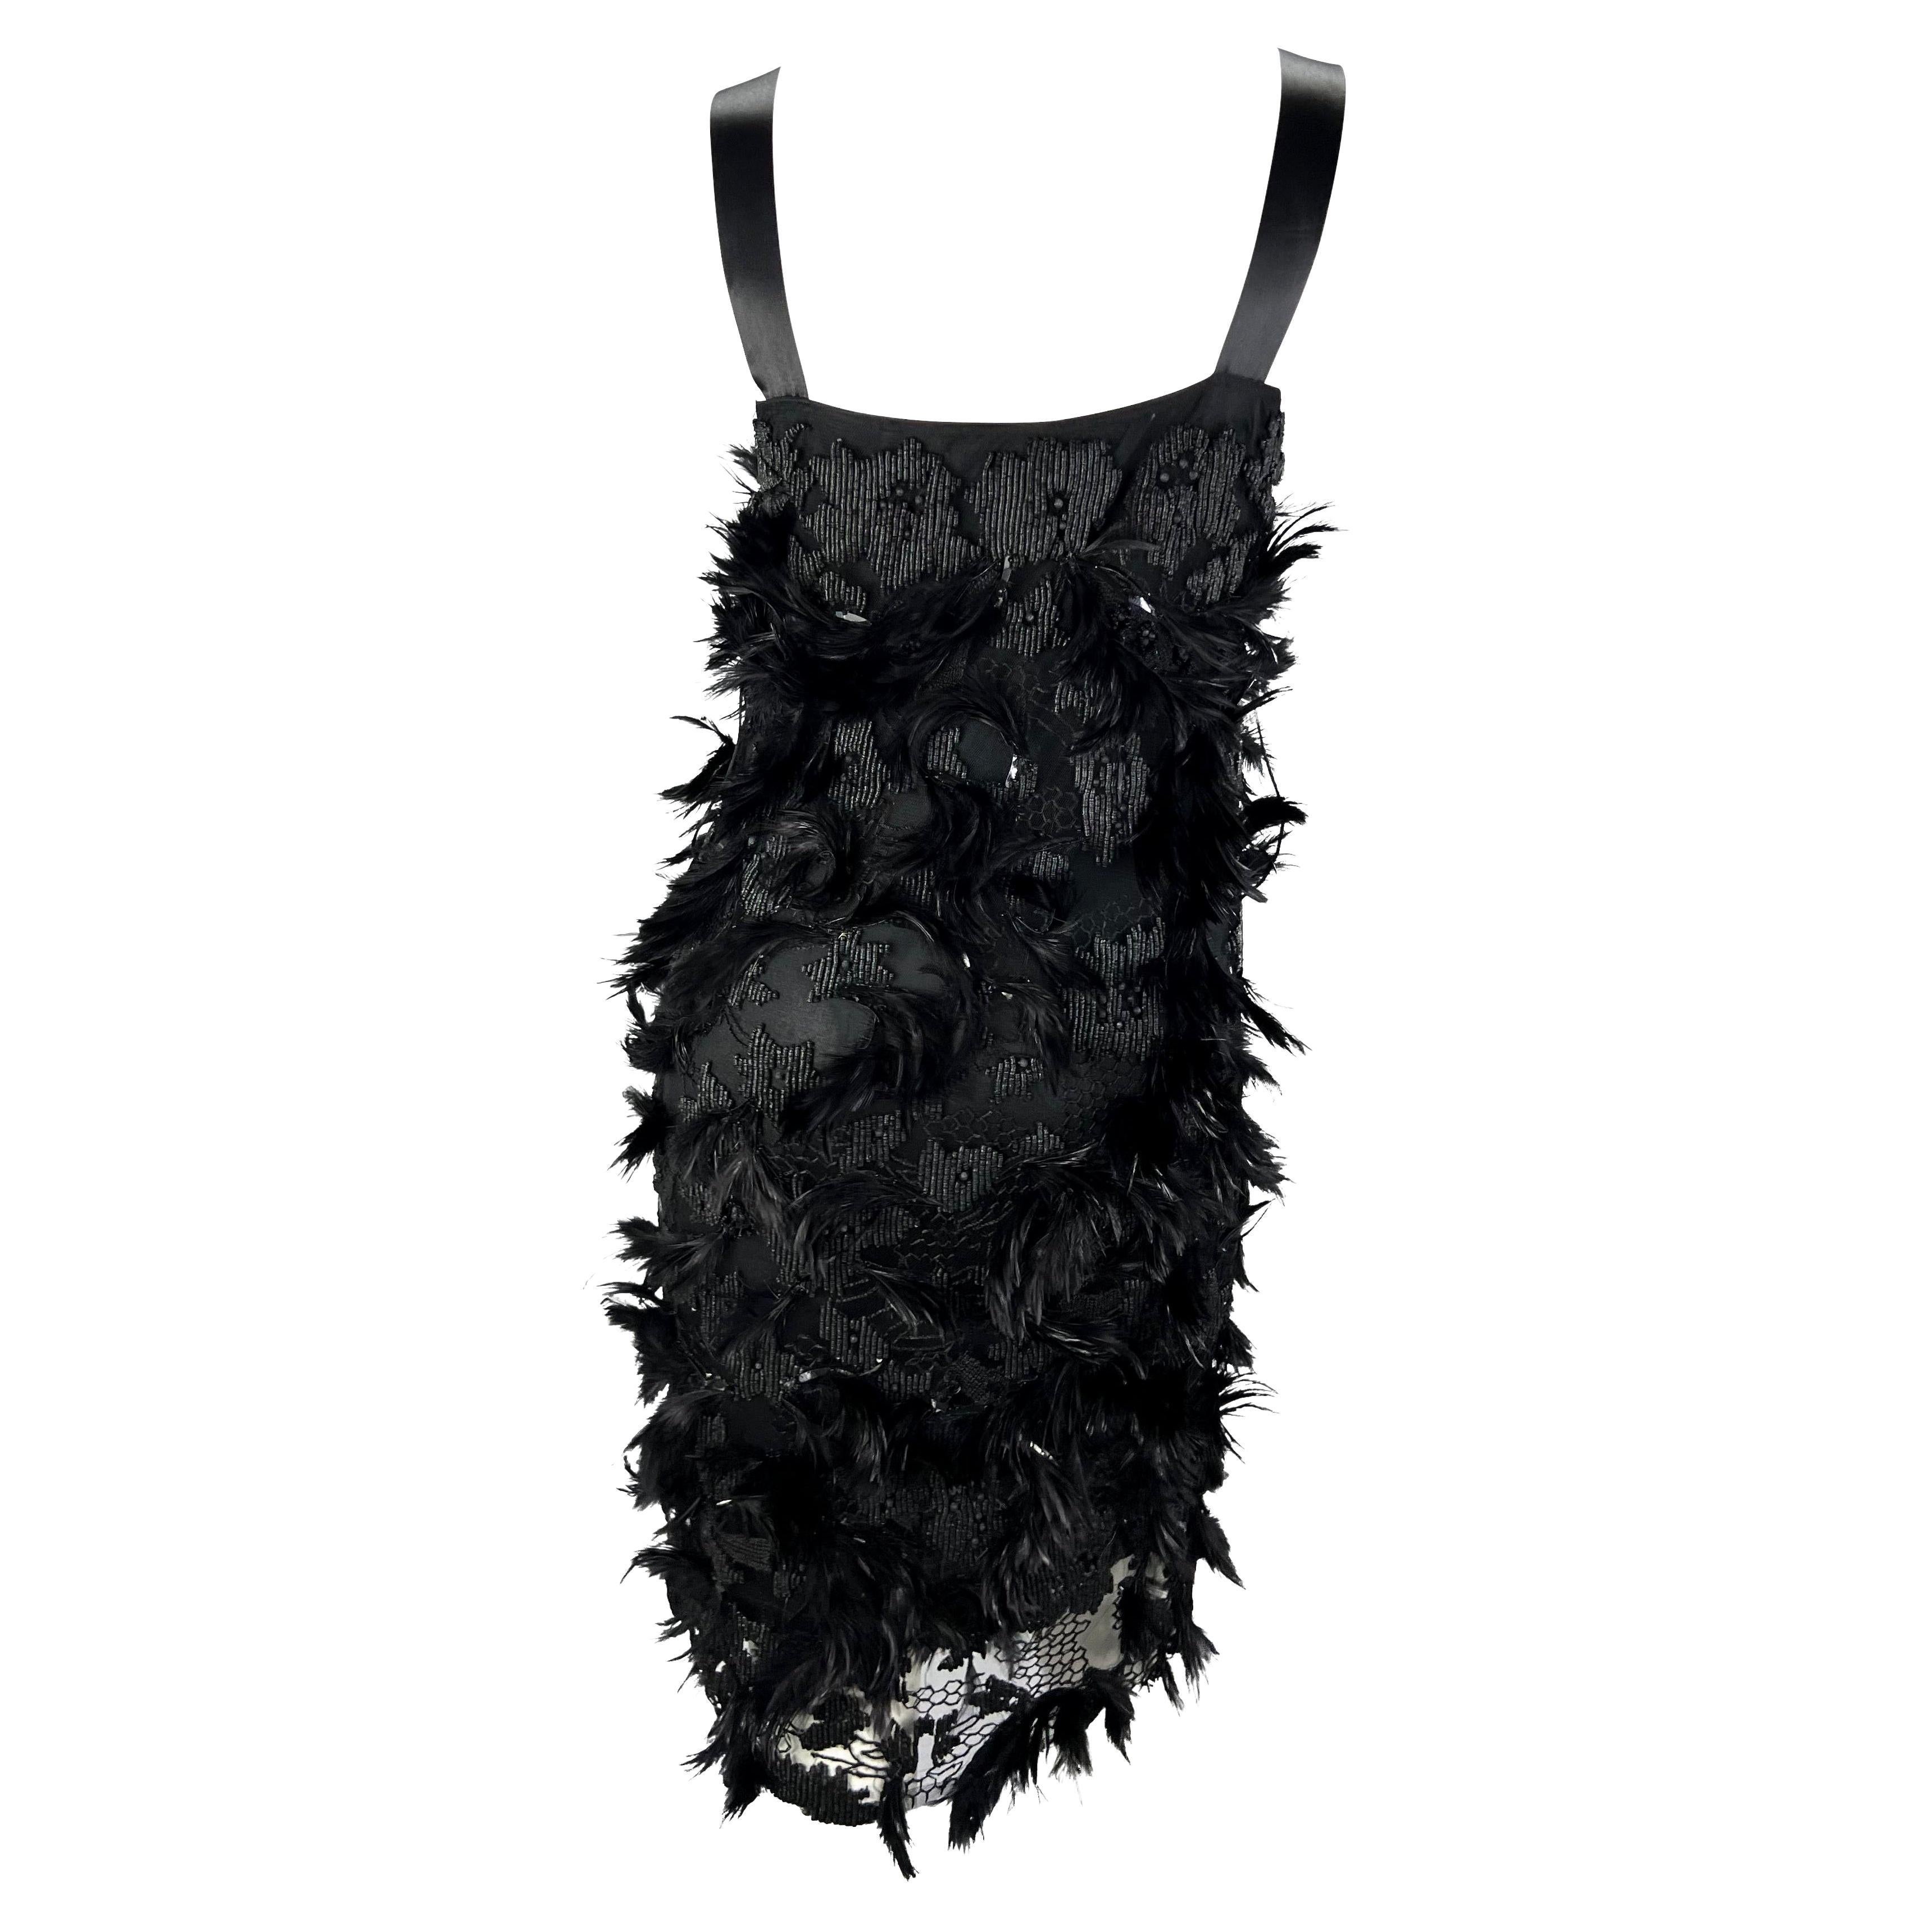 Women's S/S 2001 Yves Saint Laurent by Tom Ford Runway Feather Beaded Ribbon Dress For Sale